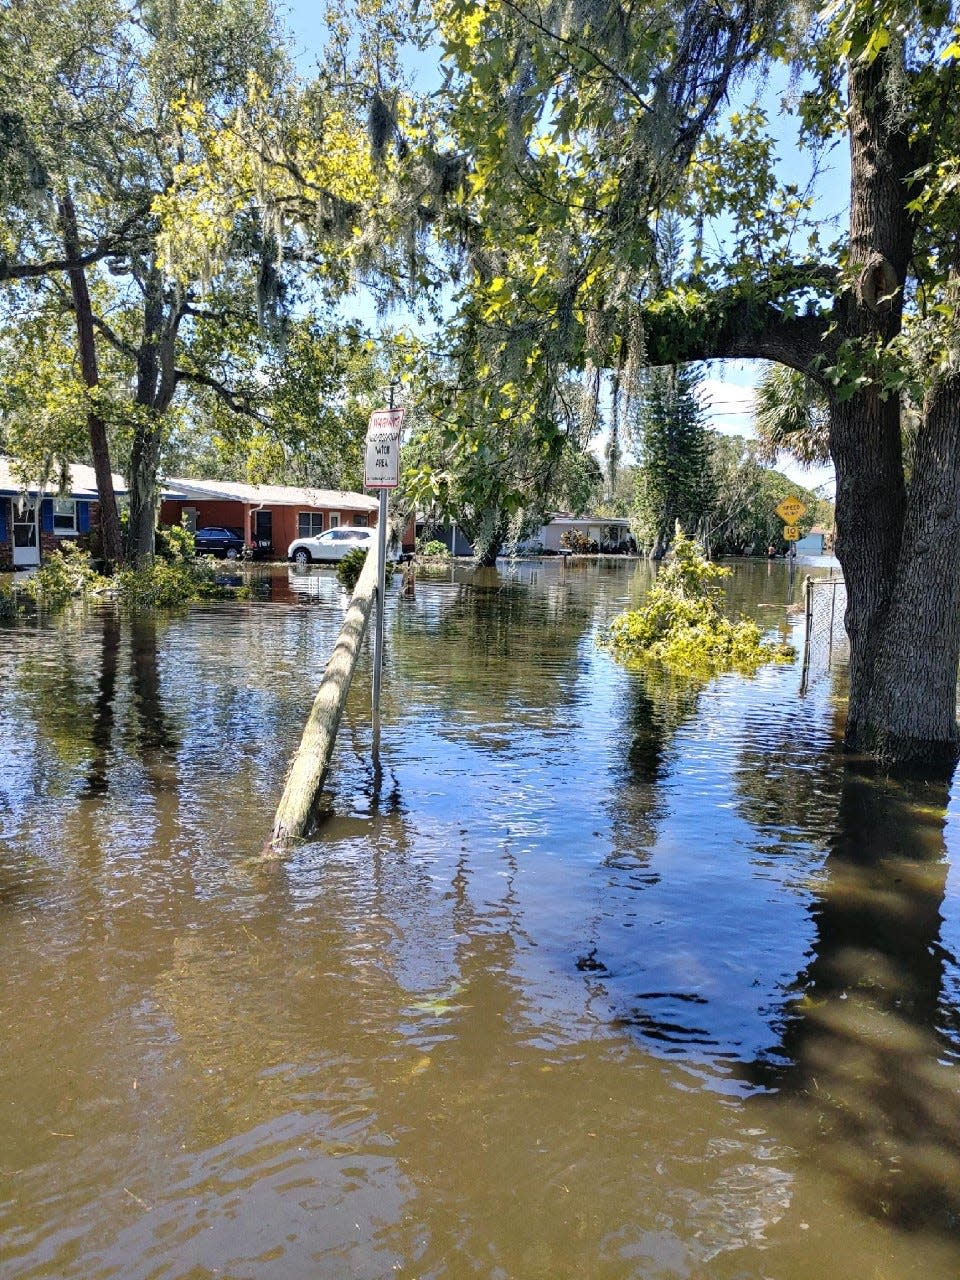 Daytona Beach's Midtown neighborhood was inundated with floodwater that rose as high as four feet in some areas of the community between Nova Road and Ridgewood Avenue. Pictured is Lockhart Street off of Kottle Circle as it looked on Sept. 30.